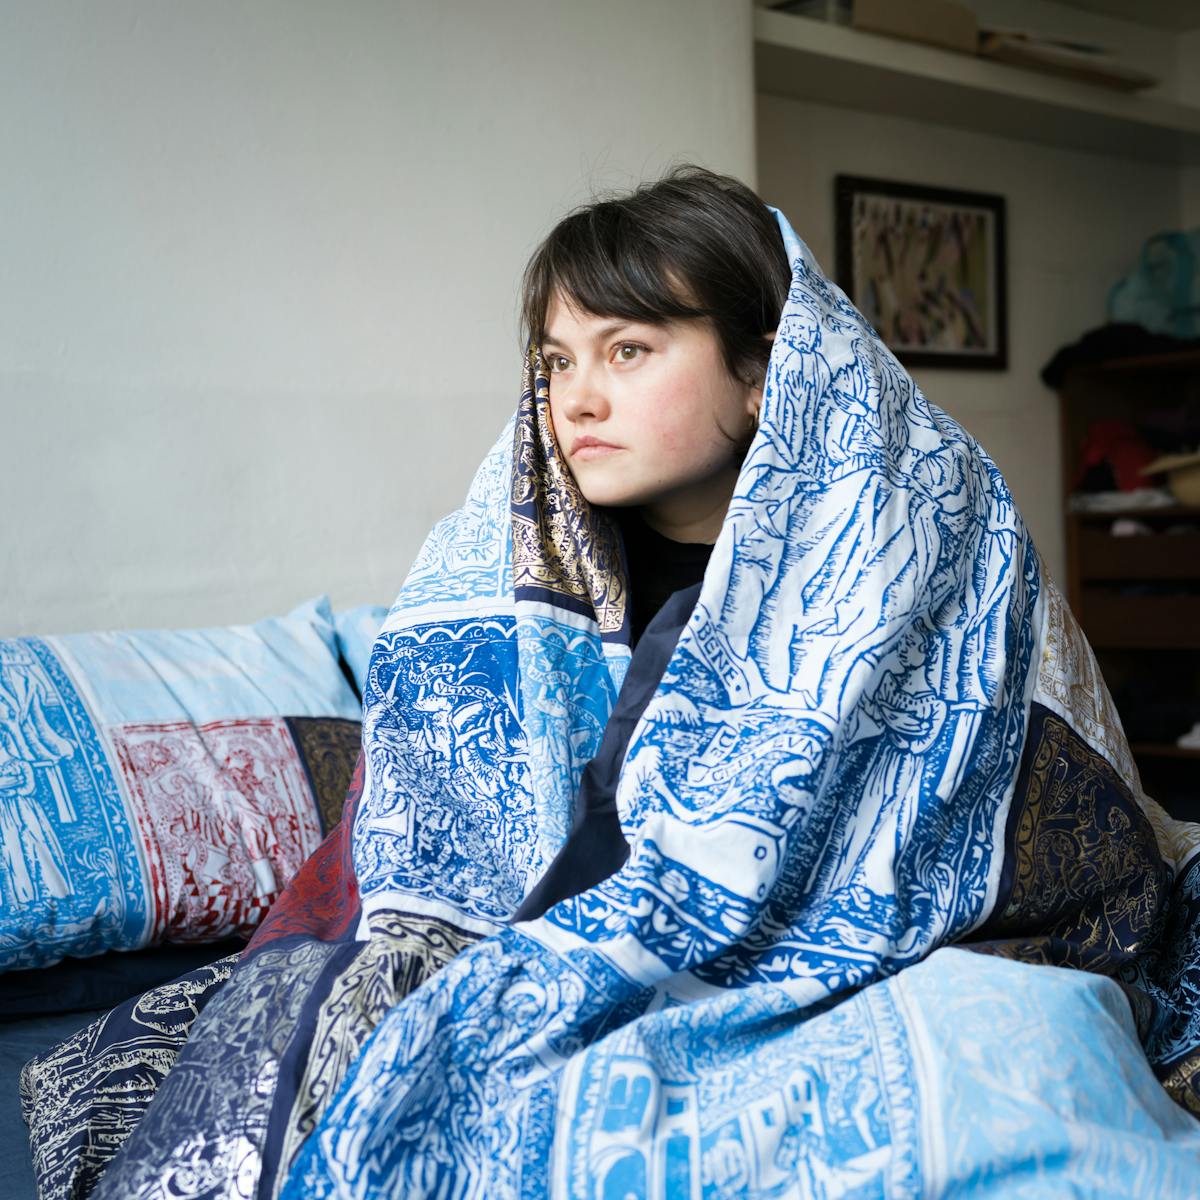 Photograph of a young woman sitting on her bed, wrapped in her duvet. The duvet cover is made of a patchwork quilt of blue, red and gold screen prints depicting woodblock engravings from a manuscript. Behind her is a framed photograph on the wall, shelves and part of her wardrobe.